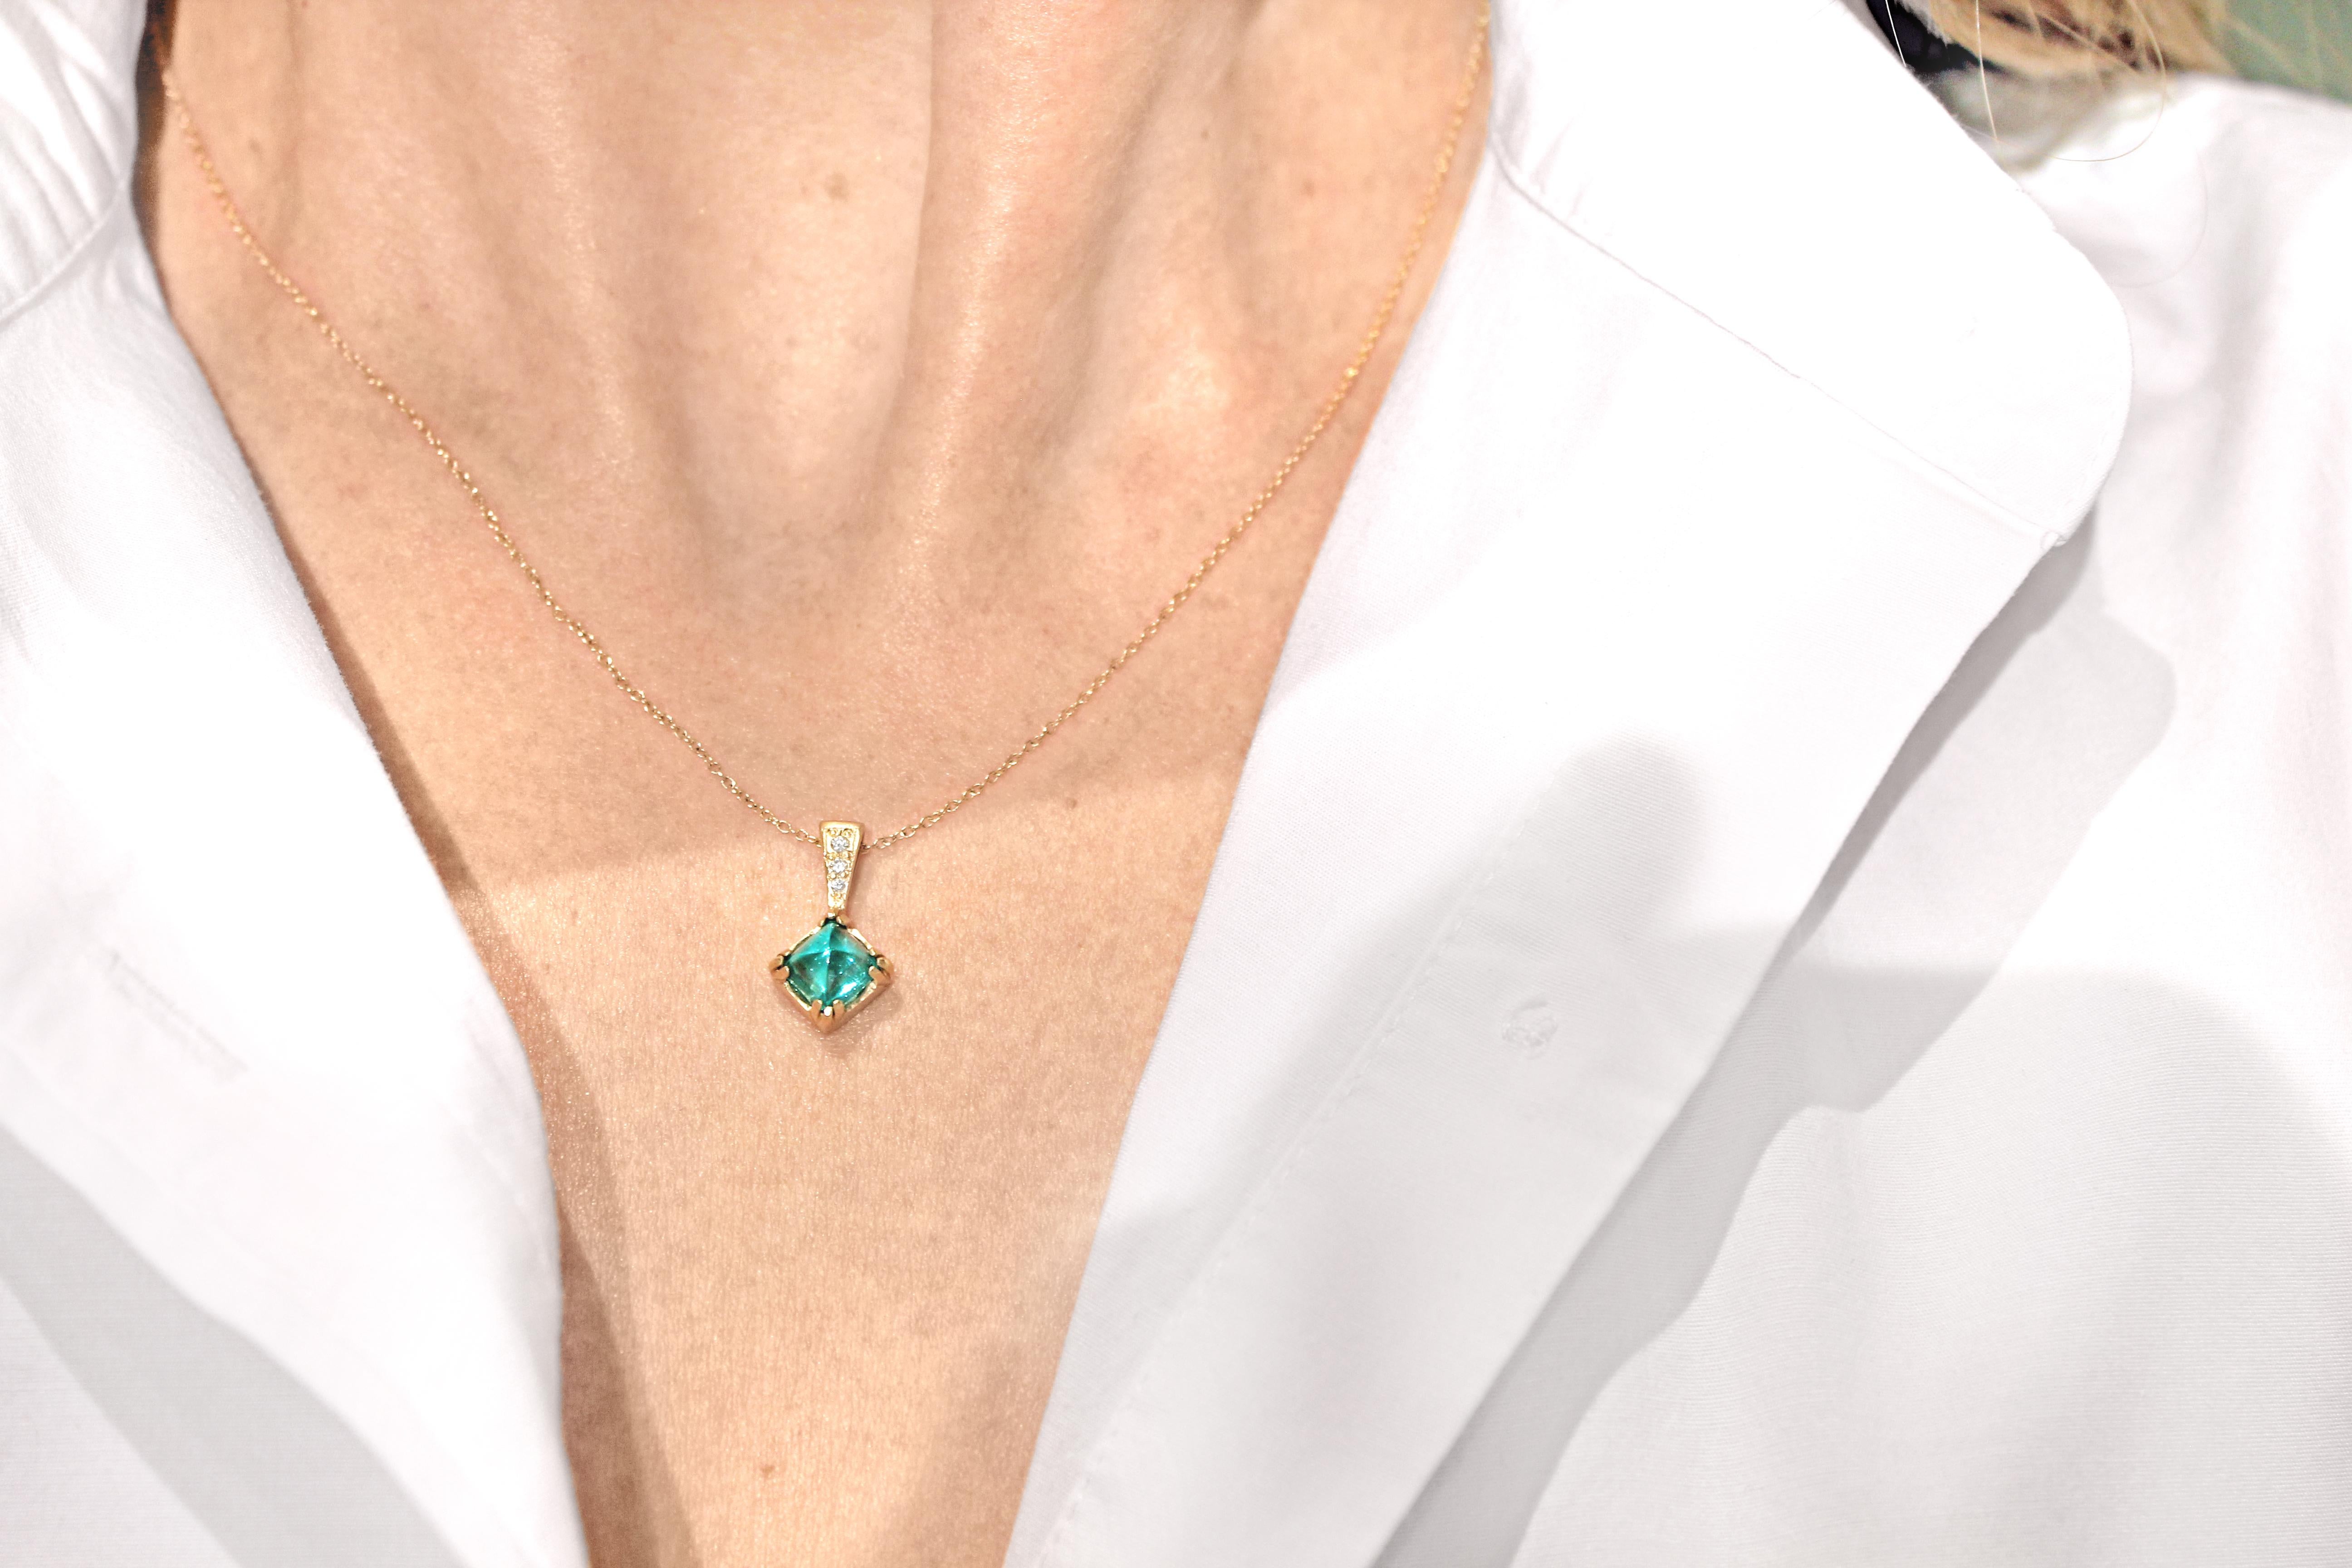 One-of-a-Kind Vintage Emerald Necklace handcrafted in matte-finished 14k yellow gold showcasing a spectacular bluish-green completely natural and unheated 1.37 carat vintage sugarloaf emerald accented with a 0.025 total carats of round brilliant-cut